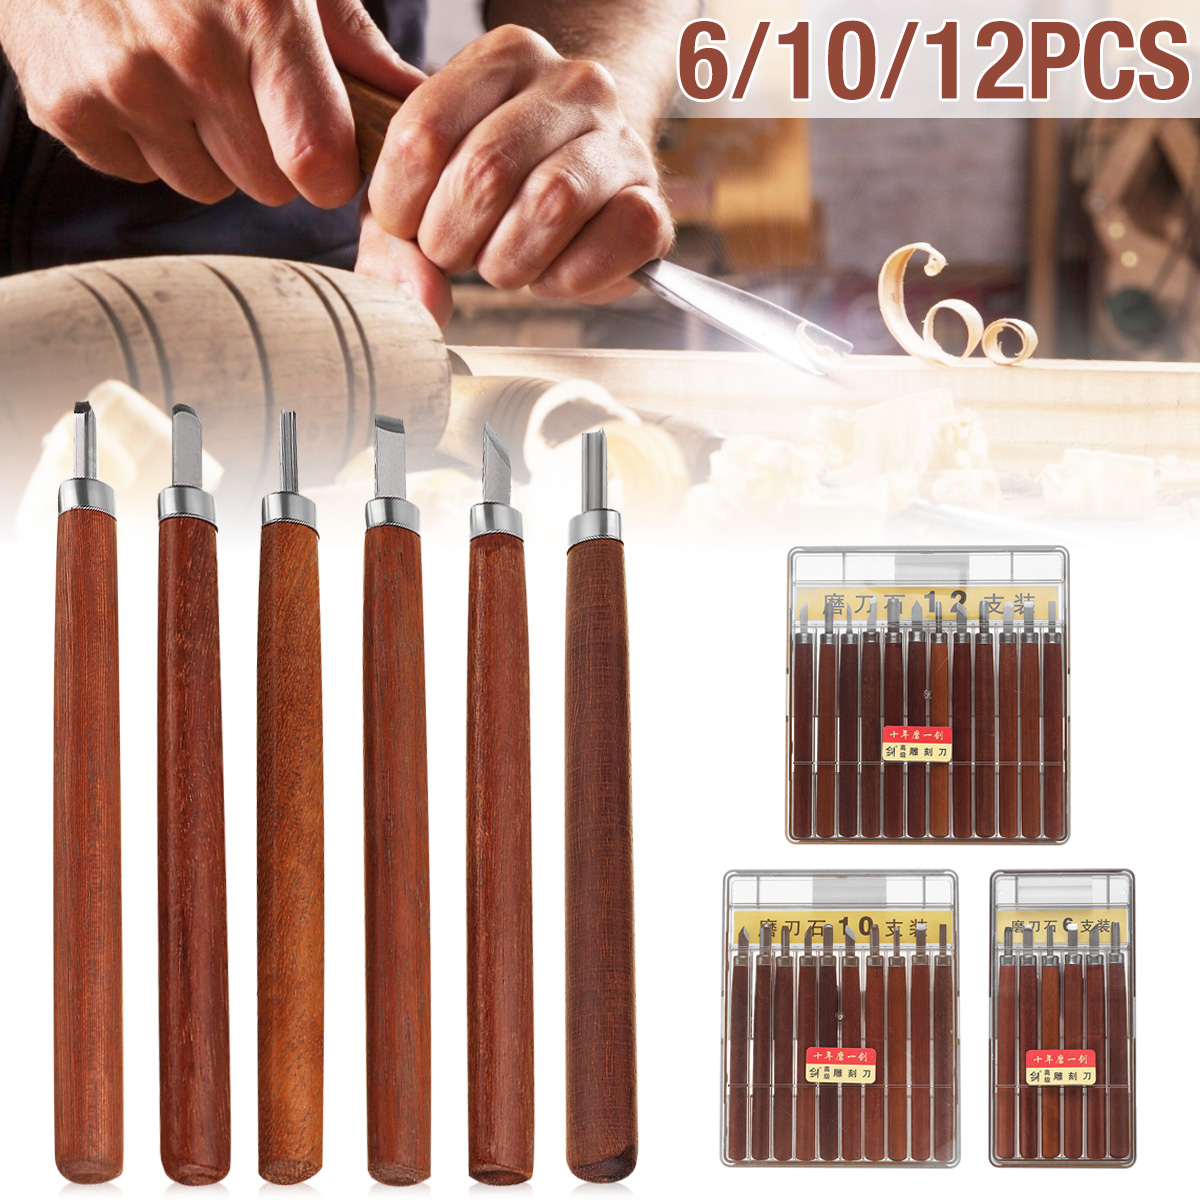 61012Pcs-Wood-Stone-Carving-Chisels-Hand-Woodworking-Kit-Cutter-Tools-Set-1773175-1